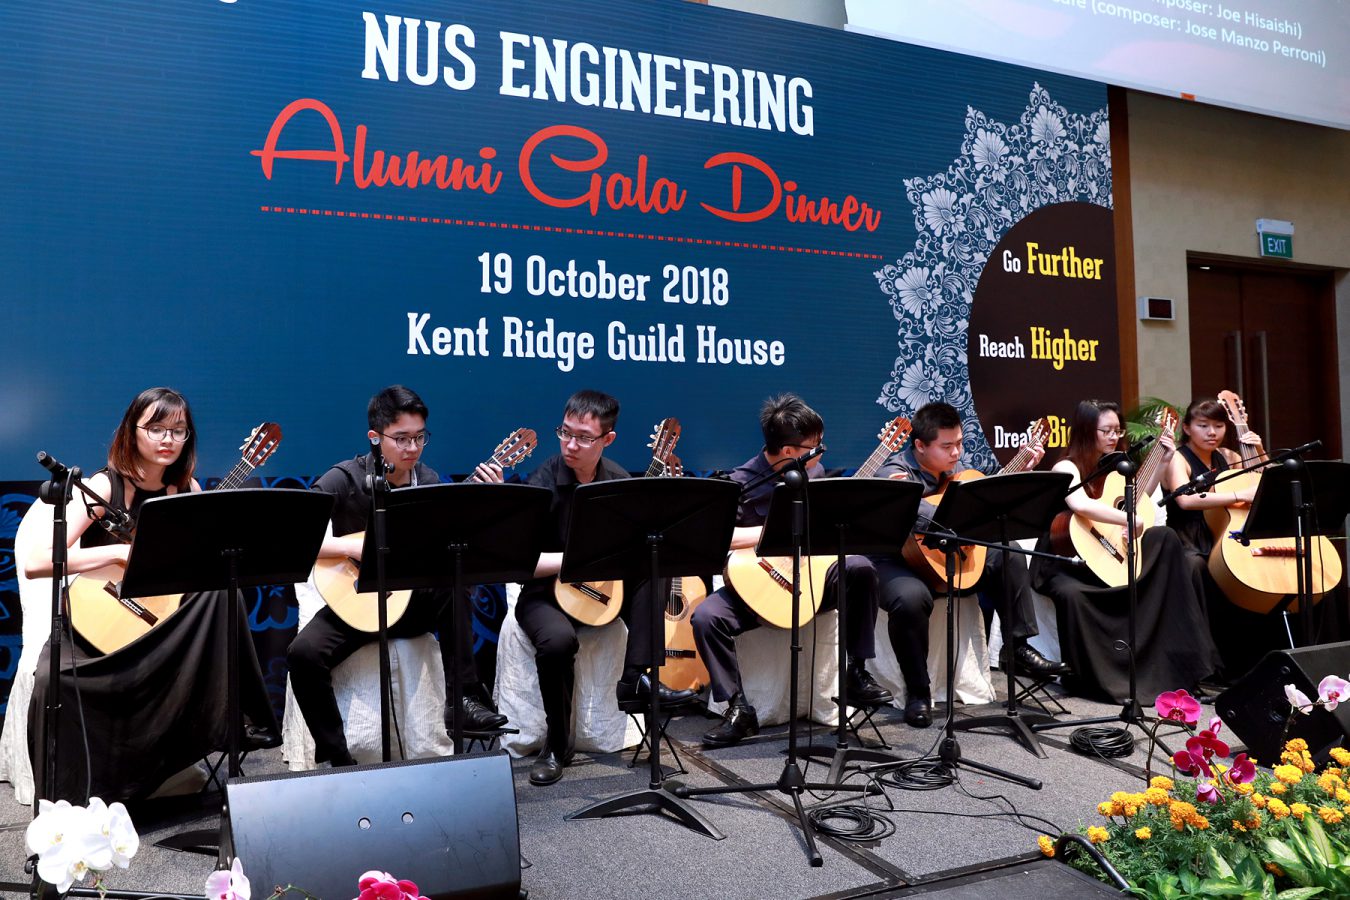 Guests at the Alumni Gala Dinner were treated to a repertoire from the NUS Guitar Ensemble.